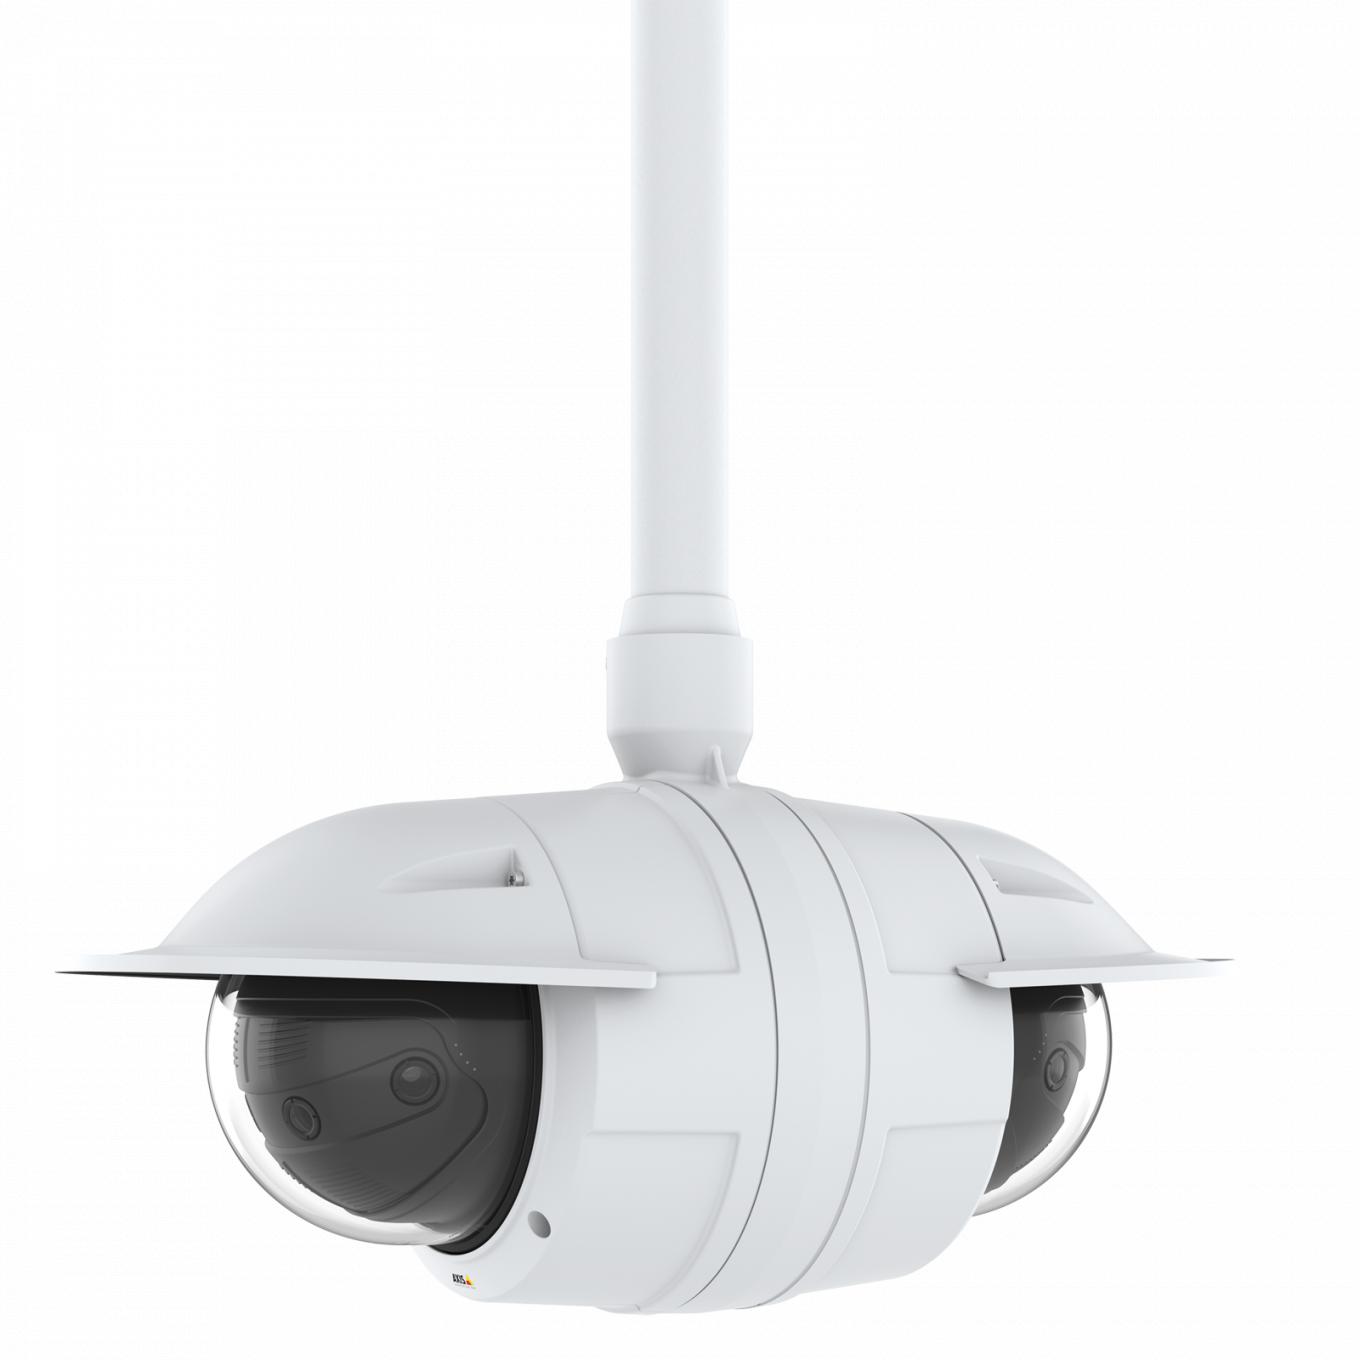 AXIS P3807-PVE has four pre-set, adjustable positions for fast and easy mounting in ceiling.